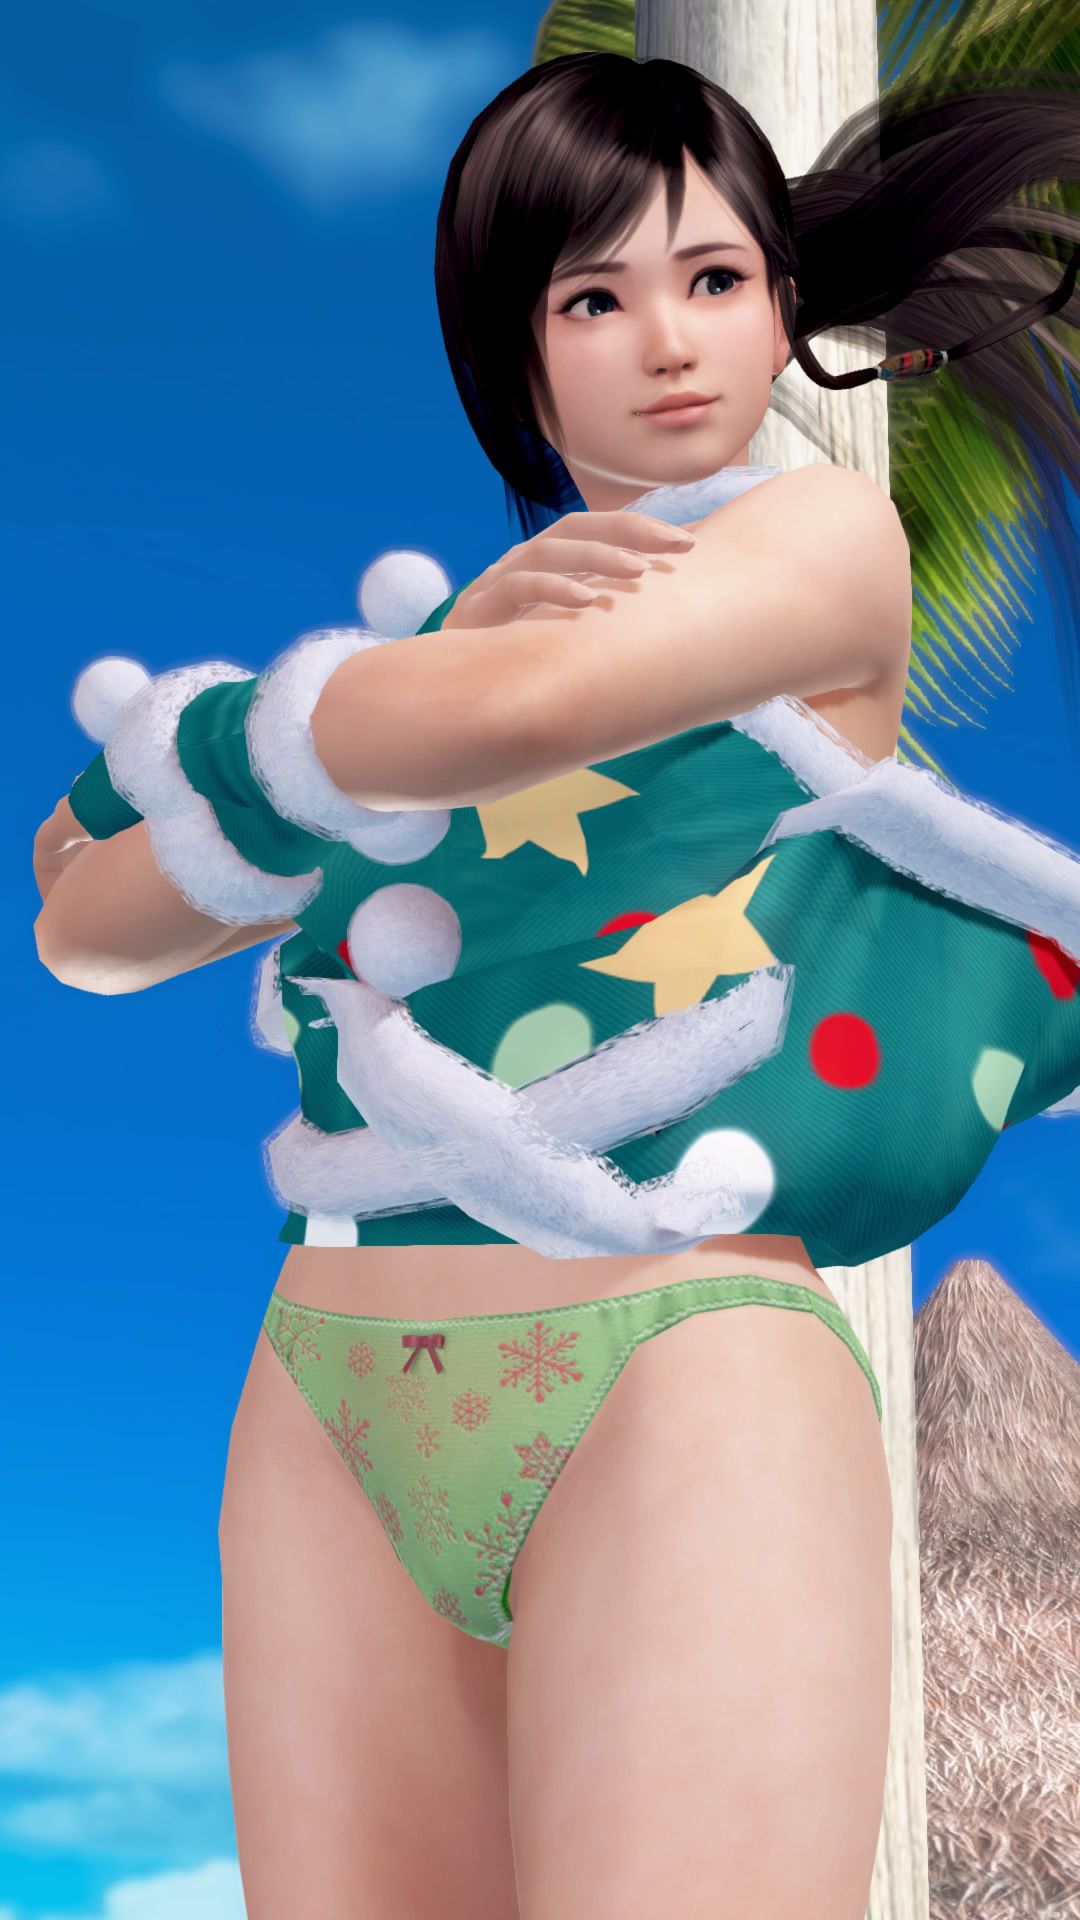 Merry Xmas from DOAX3 South Island! Photo session with new swimsuit Santa 44